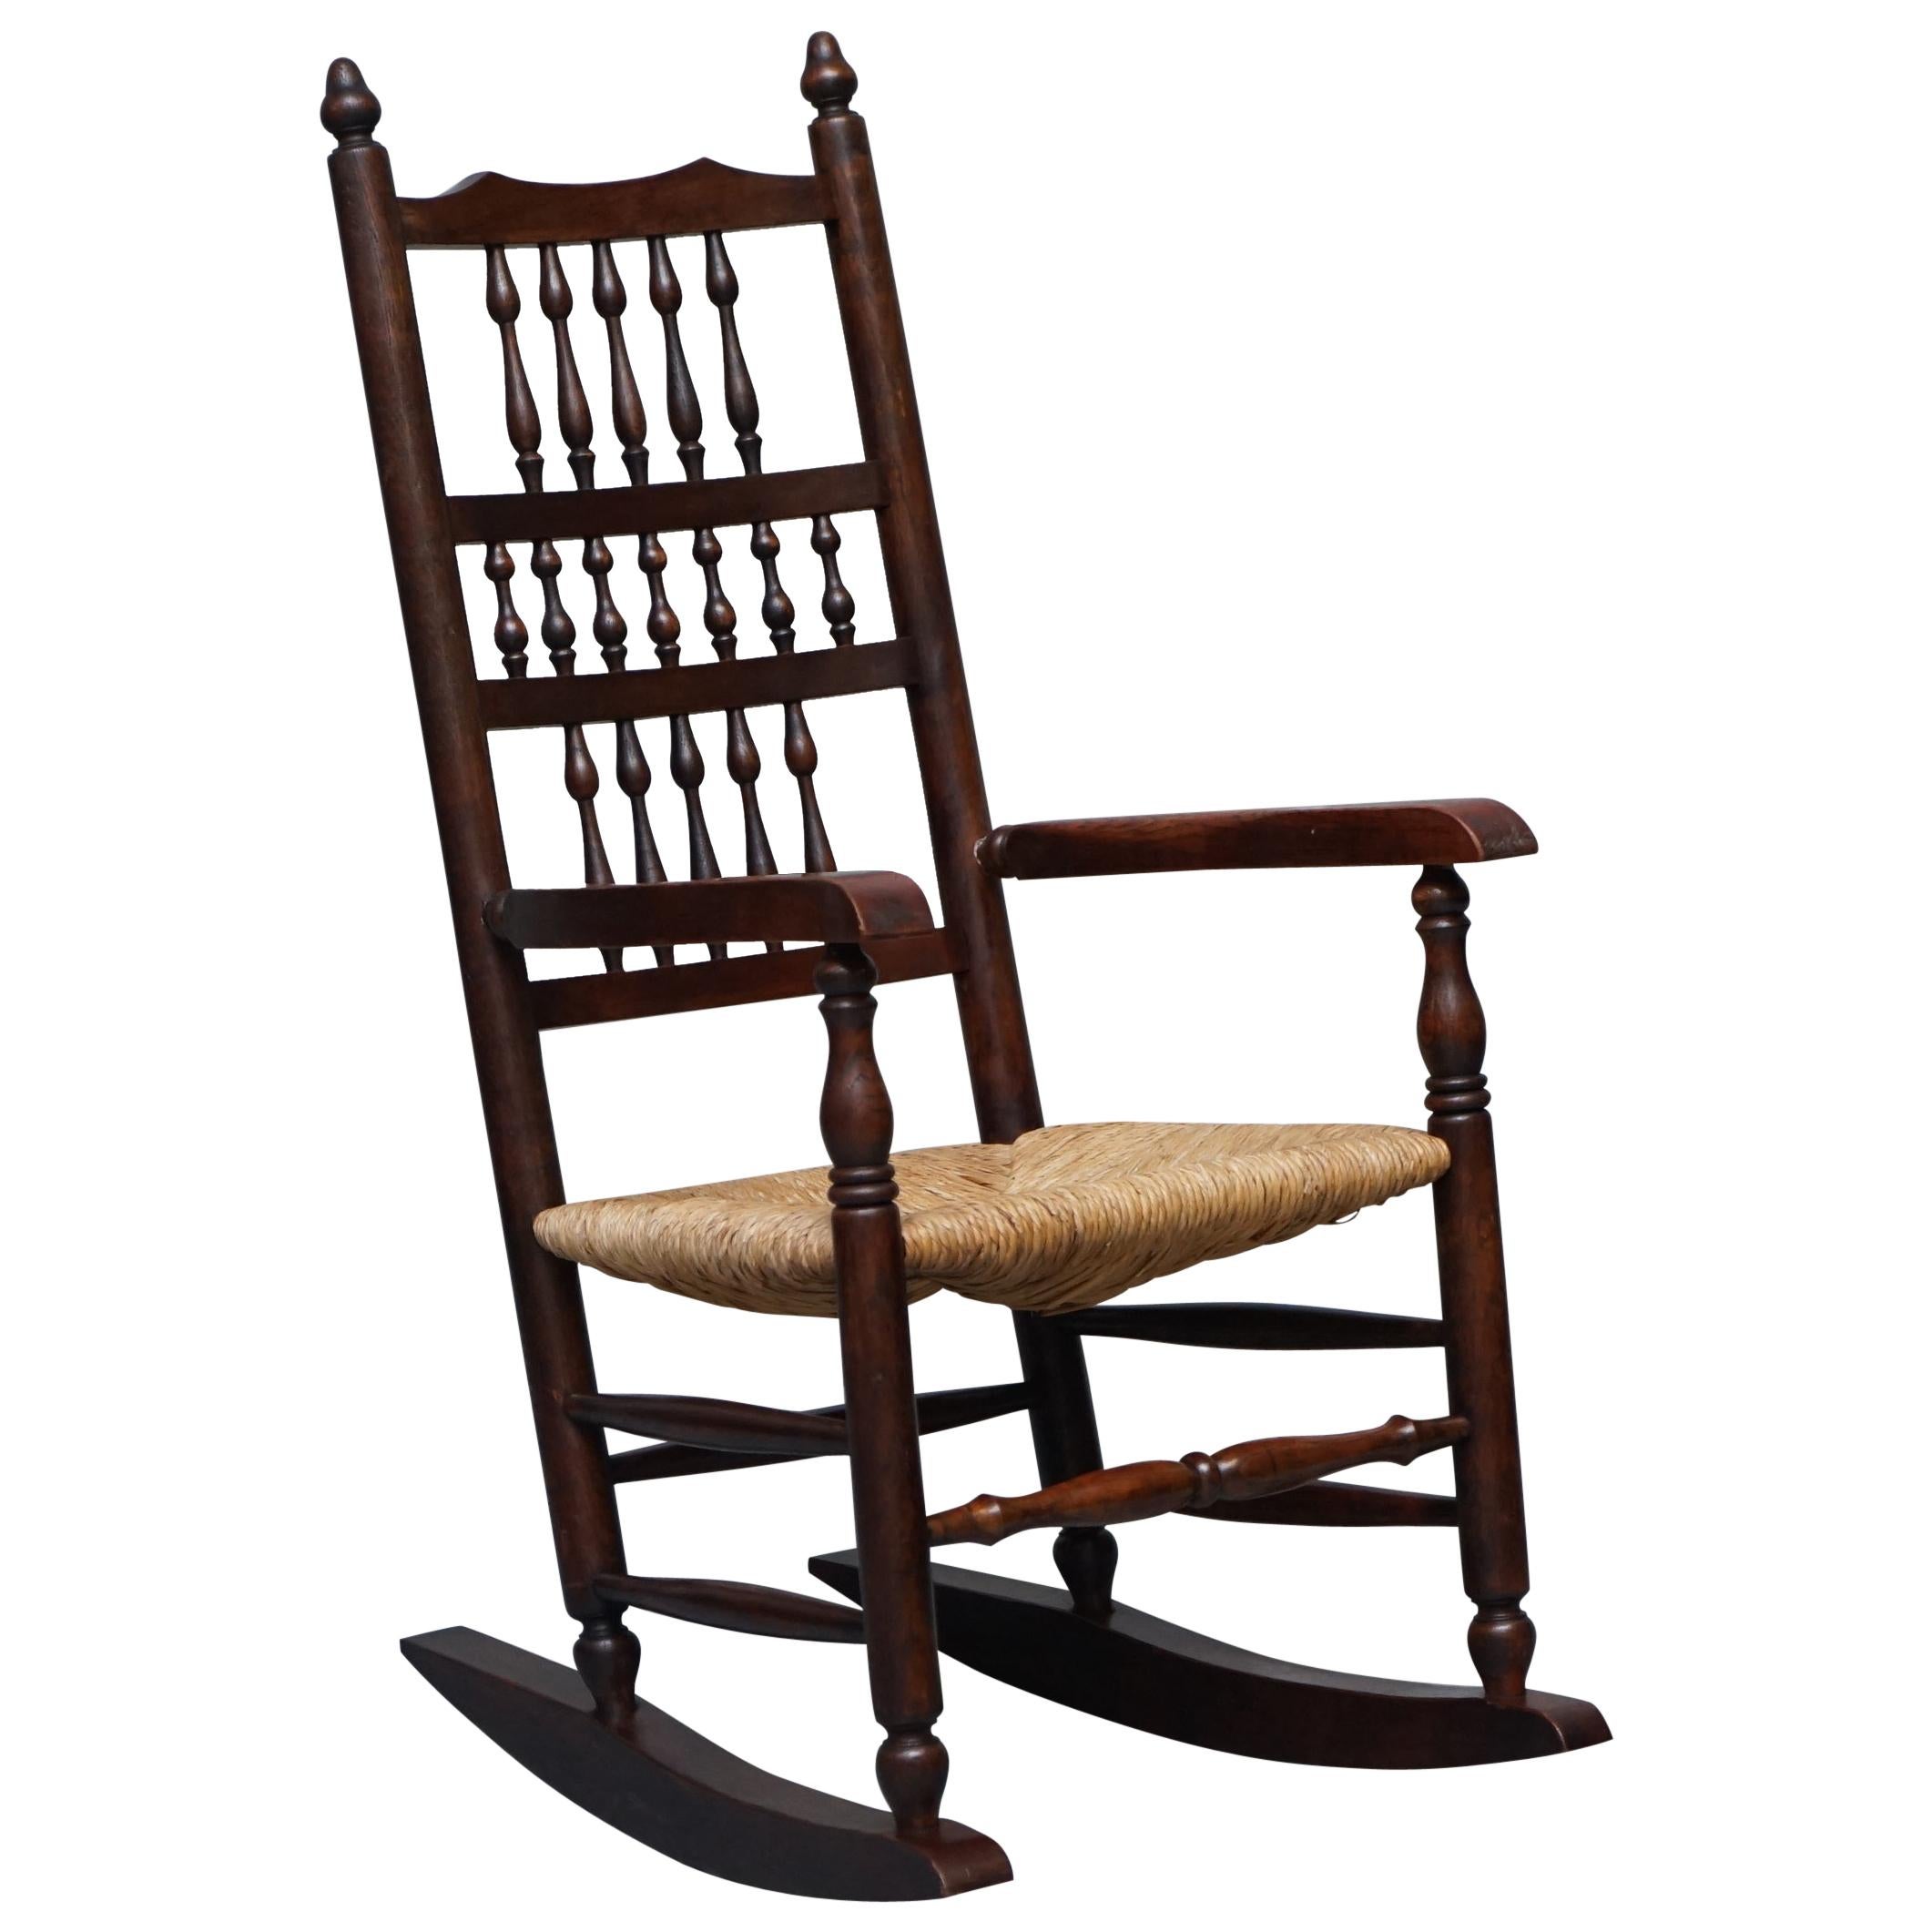 Lovely Antique Elm Victorian William Morris Sussex Chair Style Rocking  Armchair For Sale at 1stDibs | vintage rocking chair styles, victorian rocking  chair styles, antique wood rocking chair styles